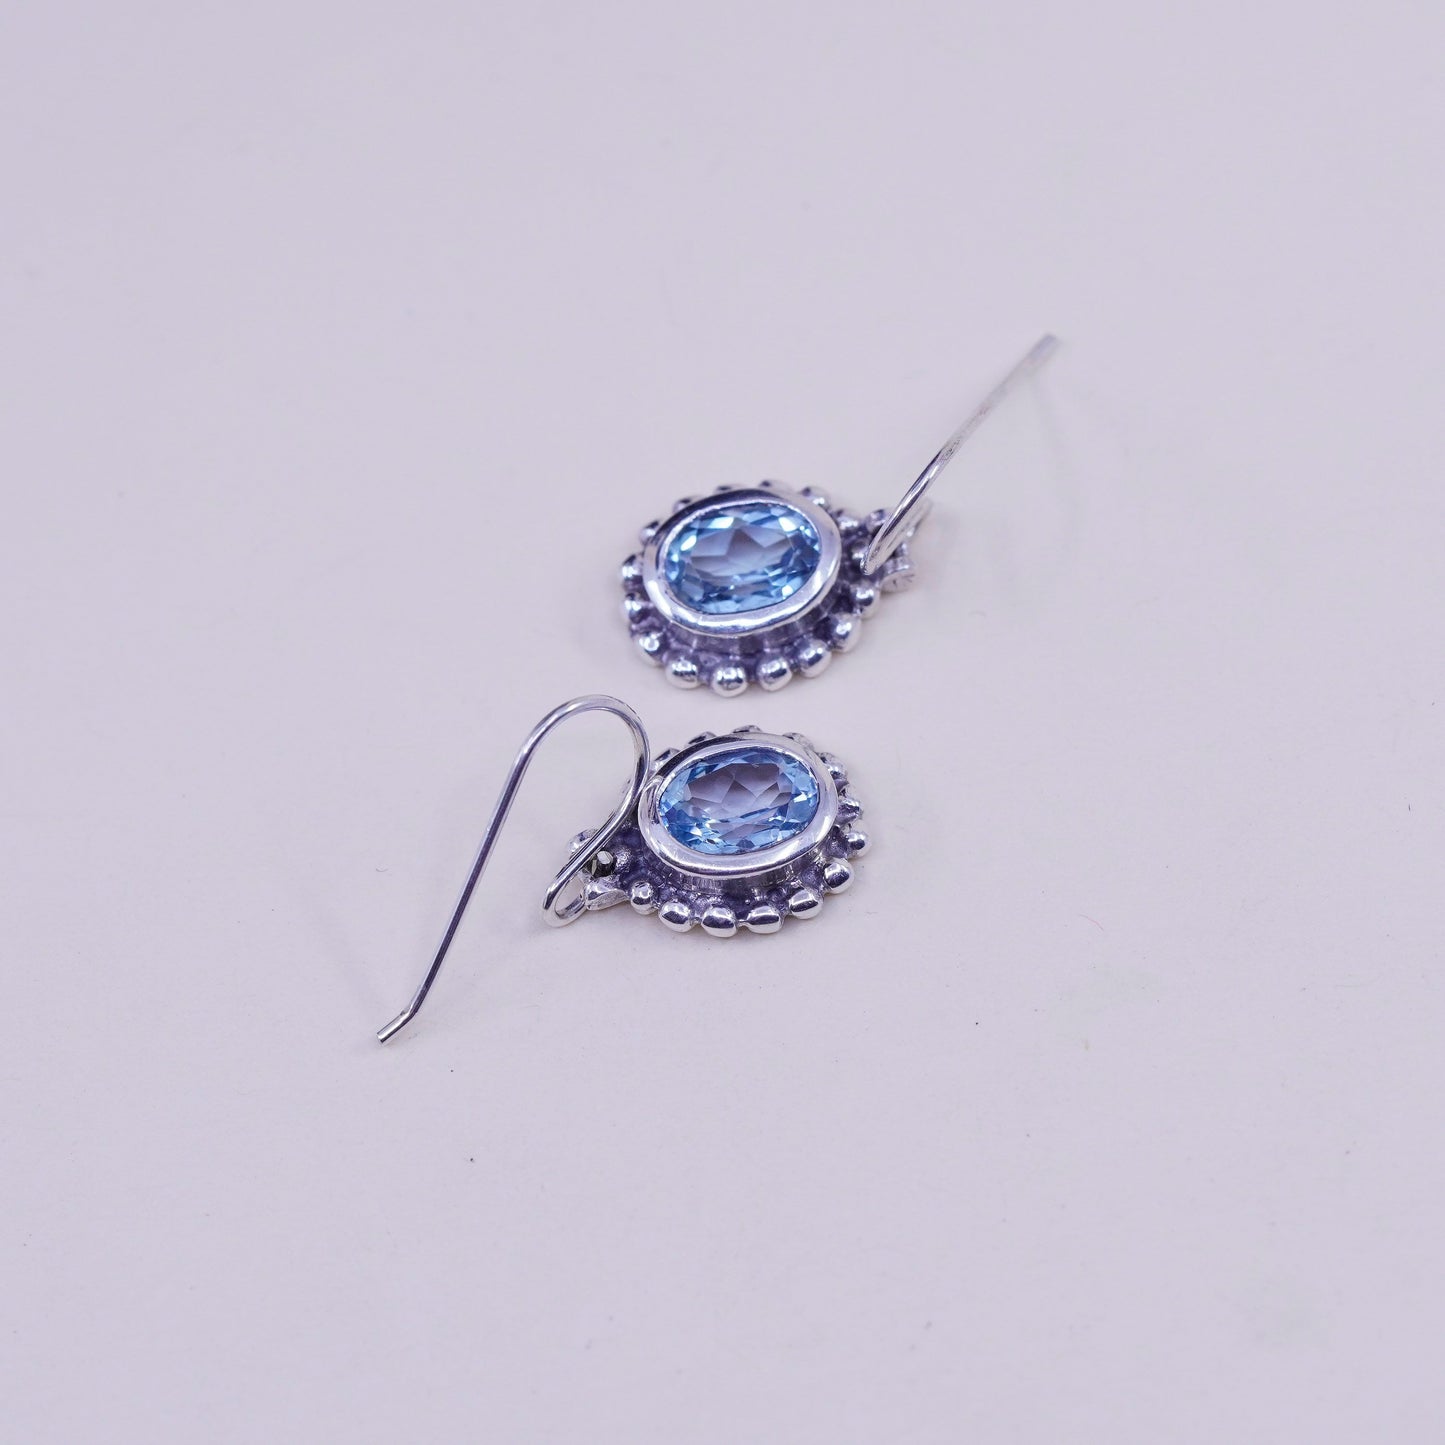 Vintage sterling 925 silver handmade earrings with topaz and beads around